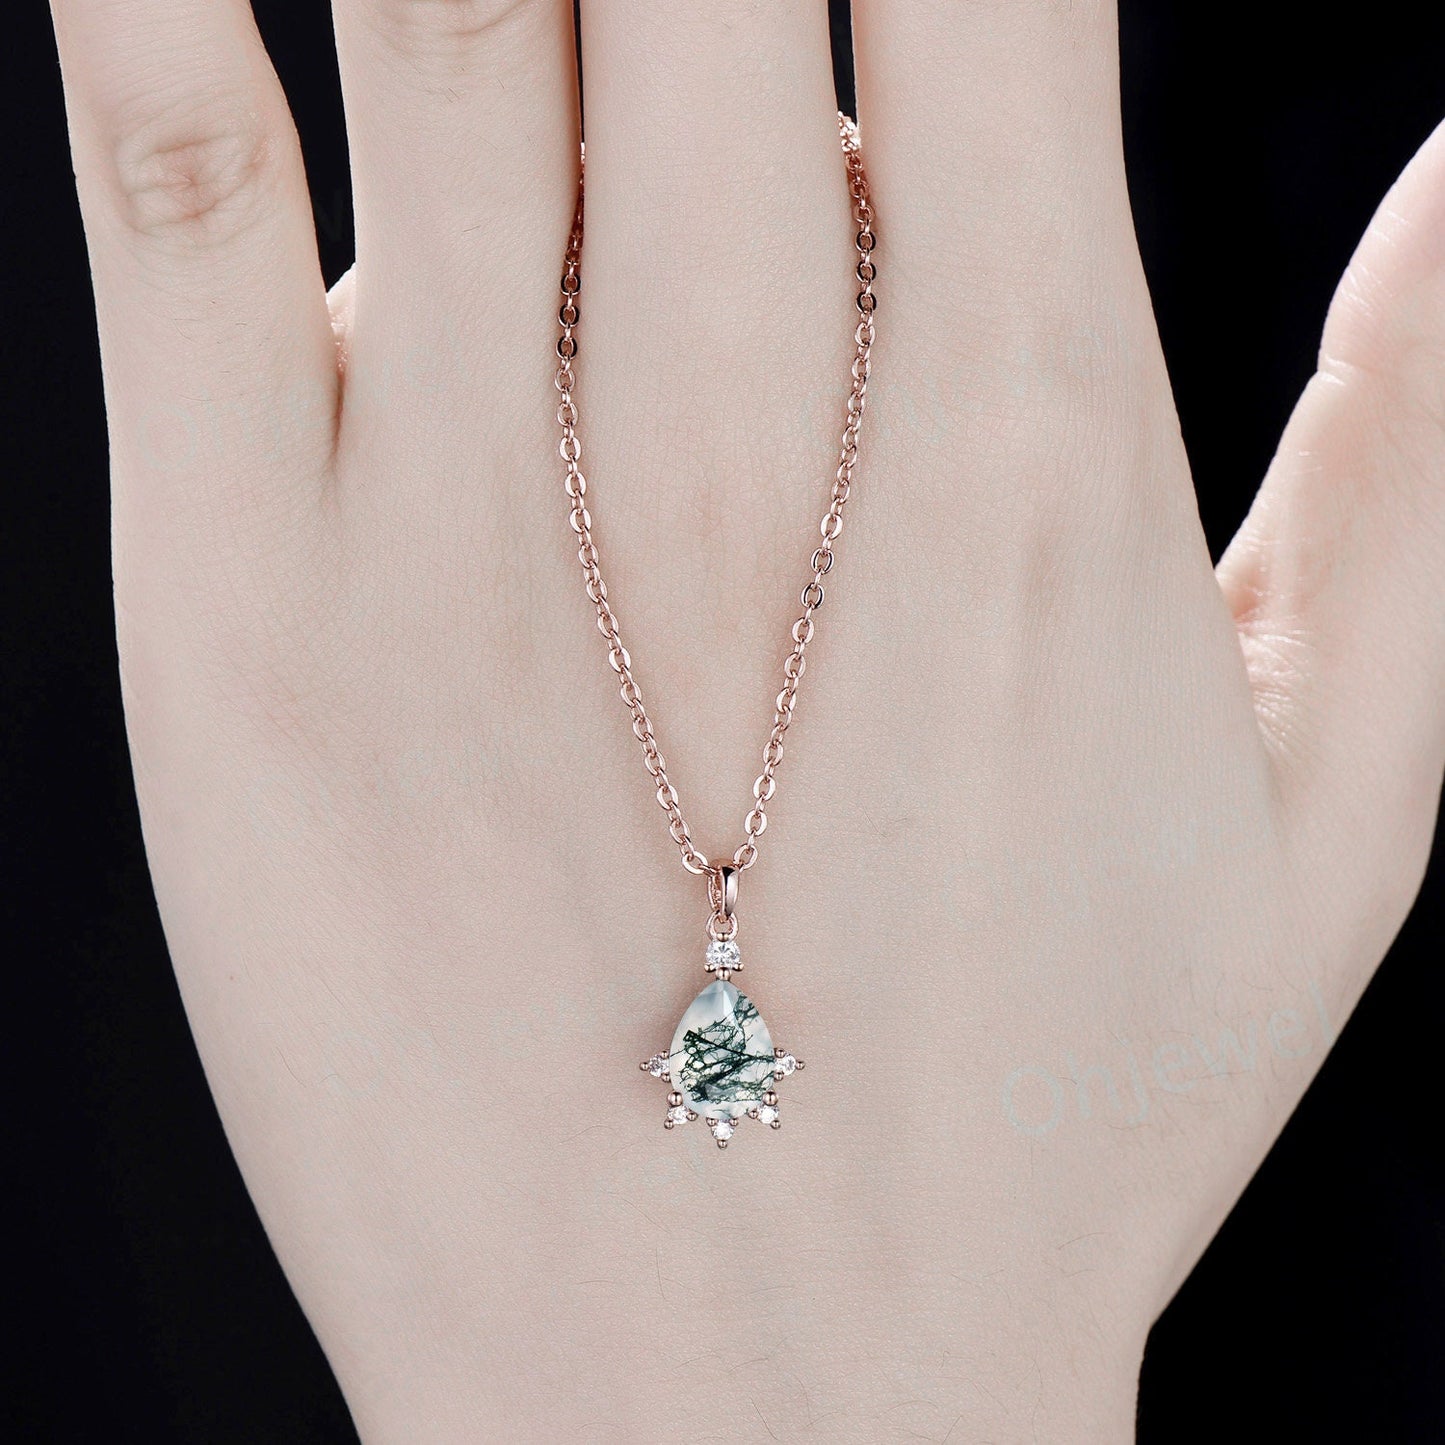 Unique pear cut green moss agate necklace snowdrift cluster diamond moissanite Pendant women solid 14k rose gold promise bridal gift jewelry